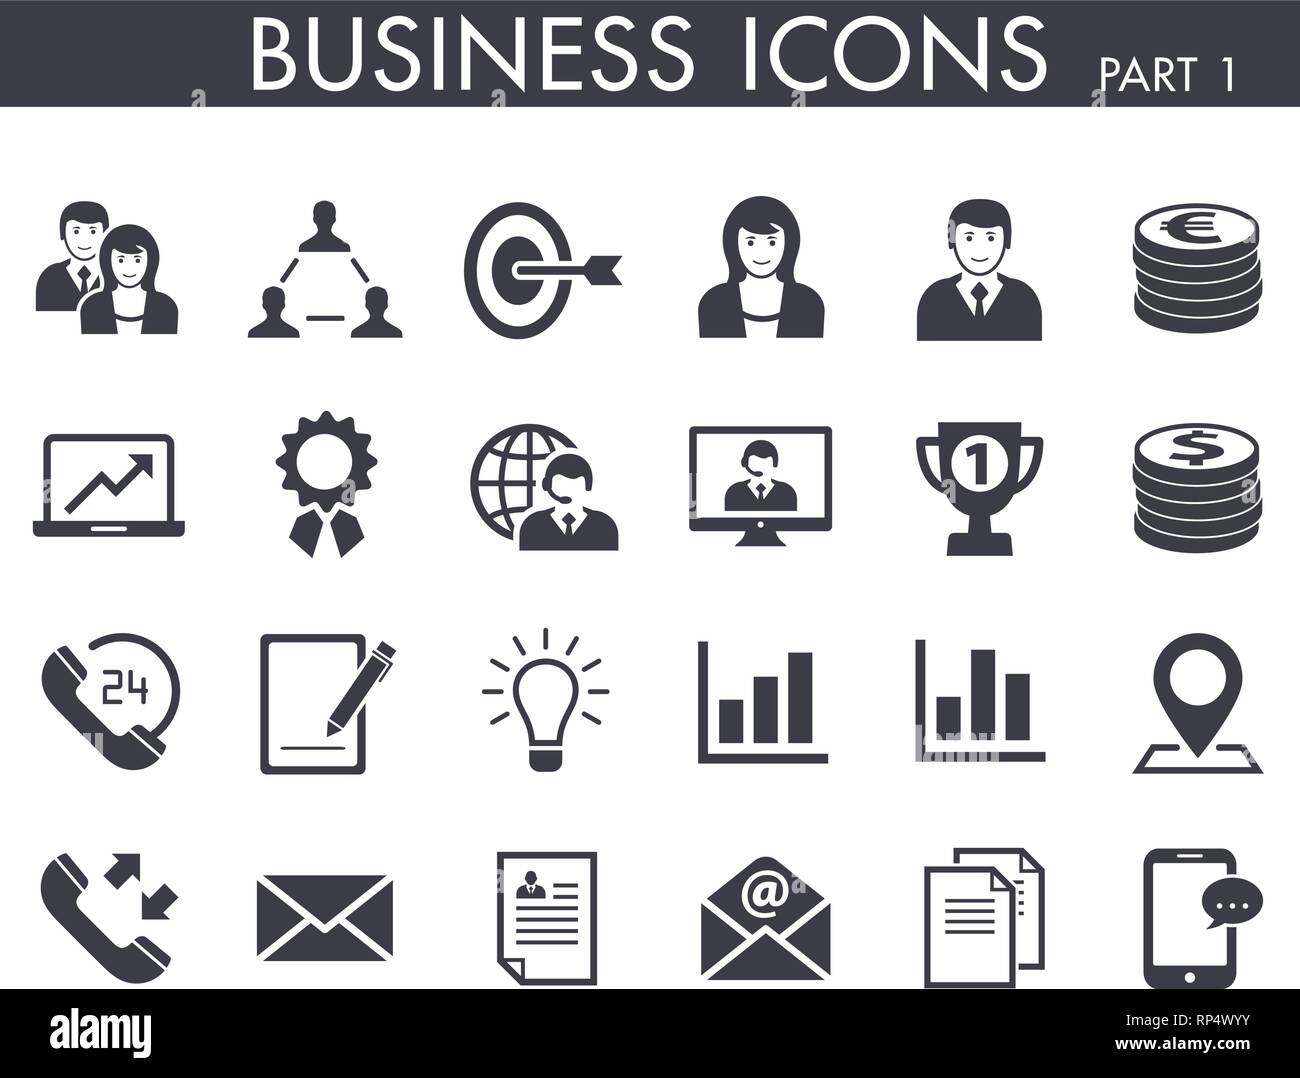 24 different business and office symbol icons Stock Vector